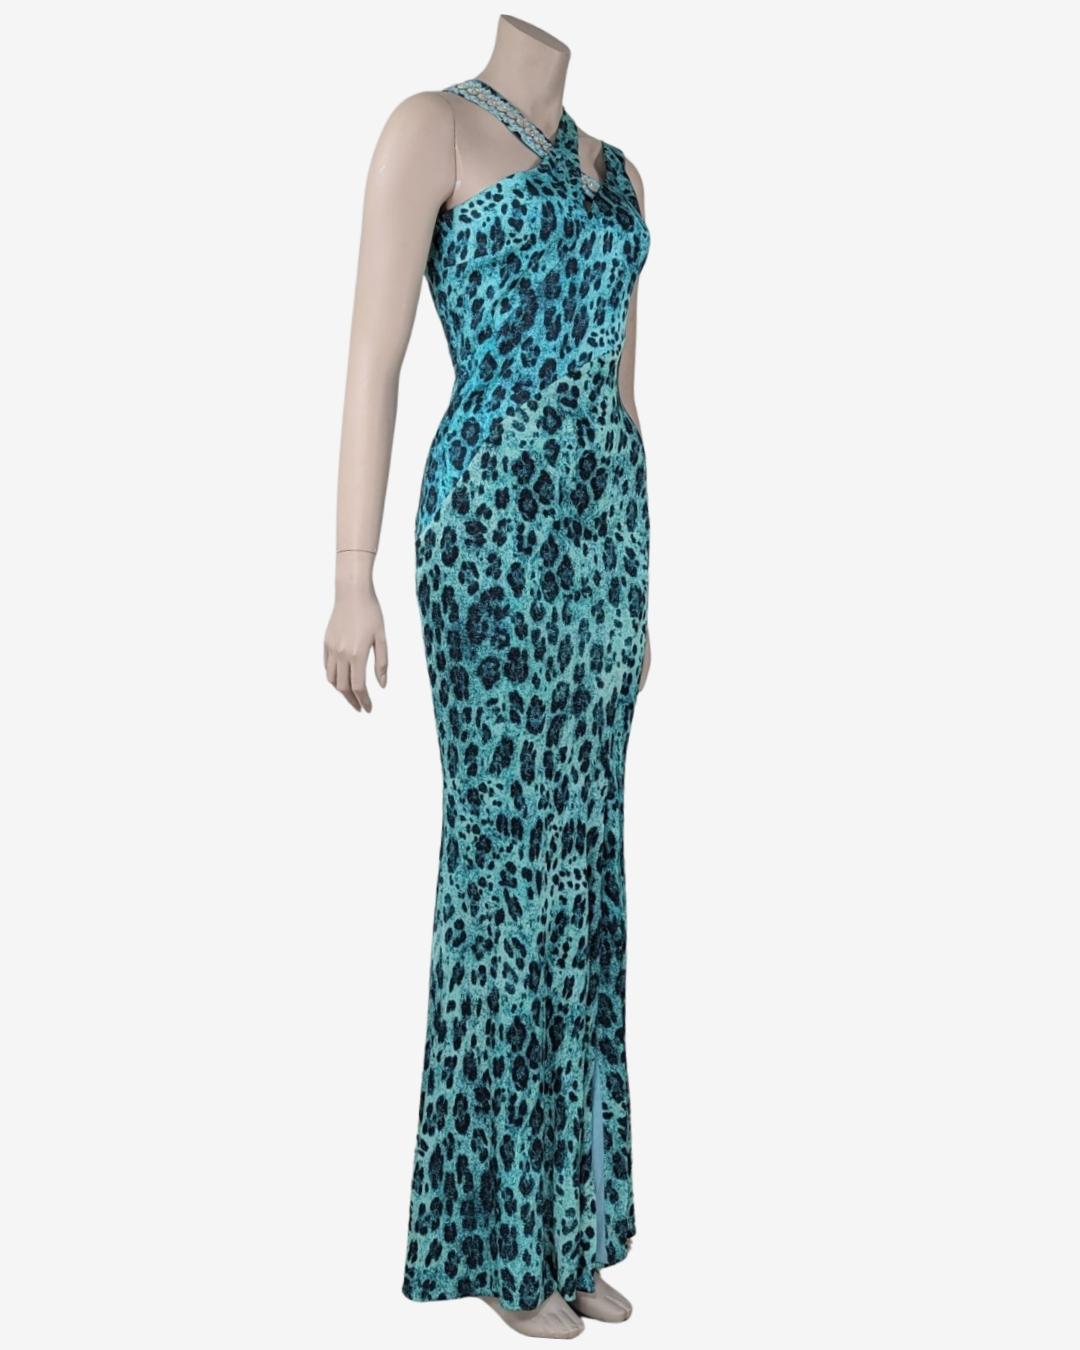 Women's Animal print all-over maxi dress from the Fall 2012 Collection For Sale